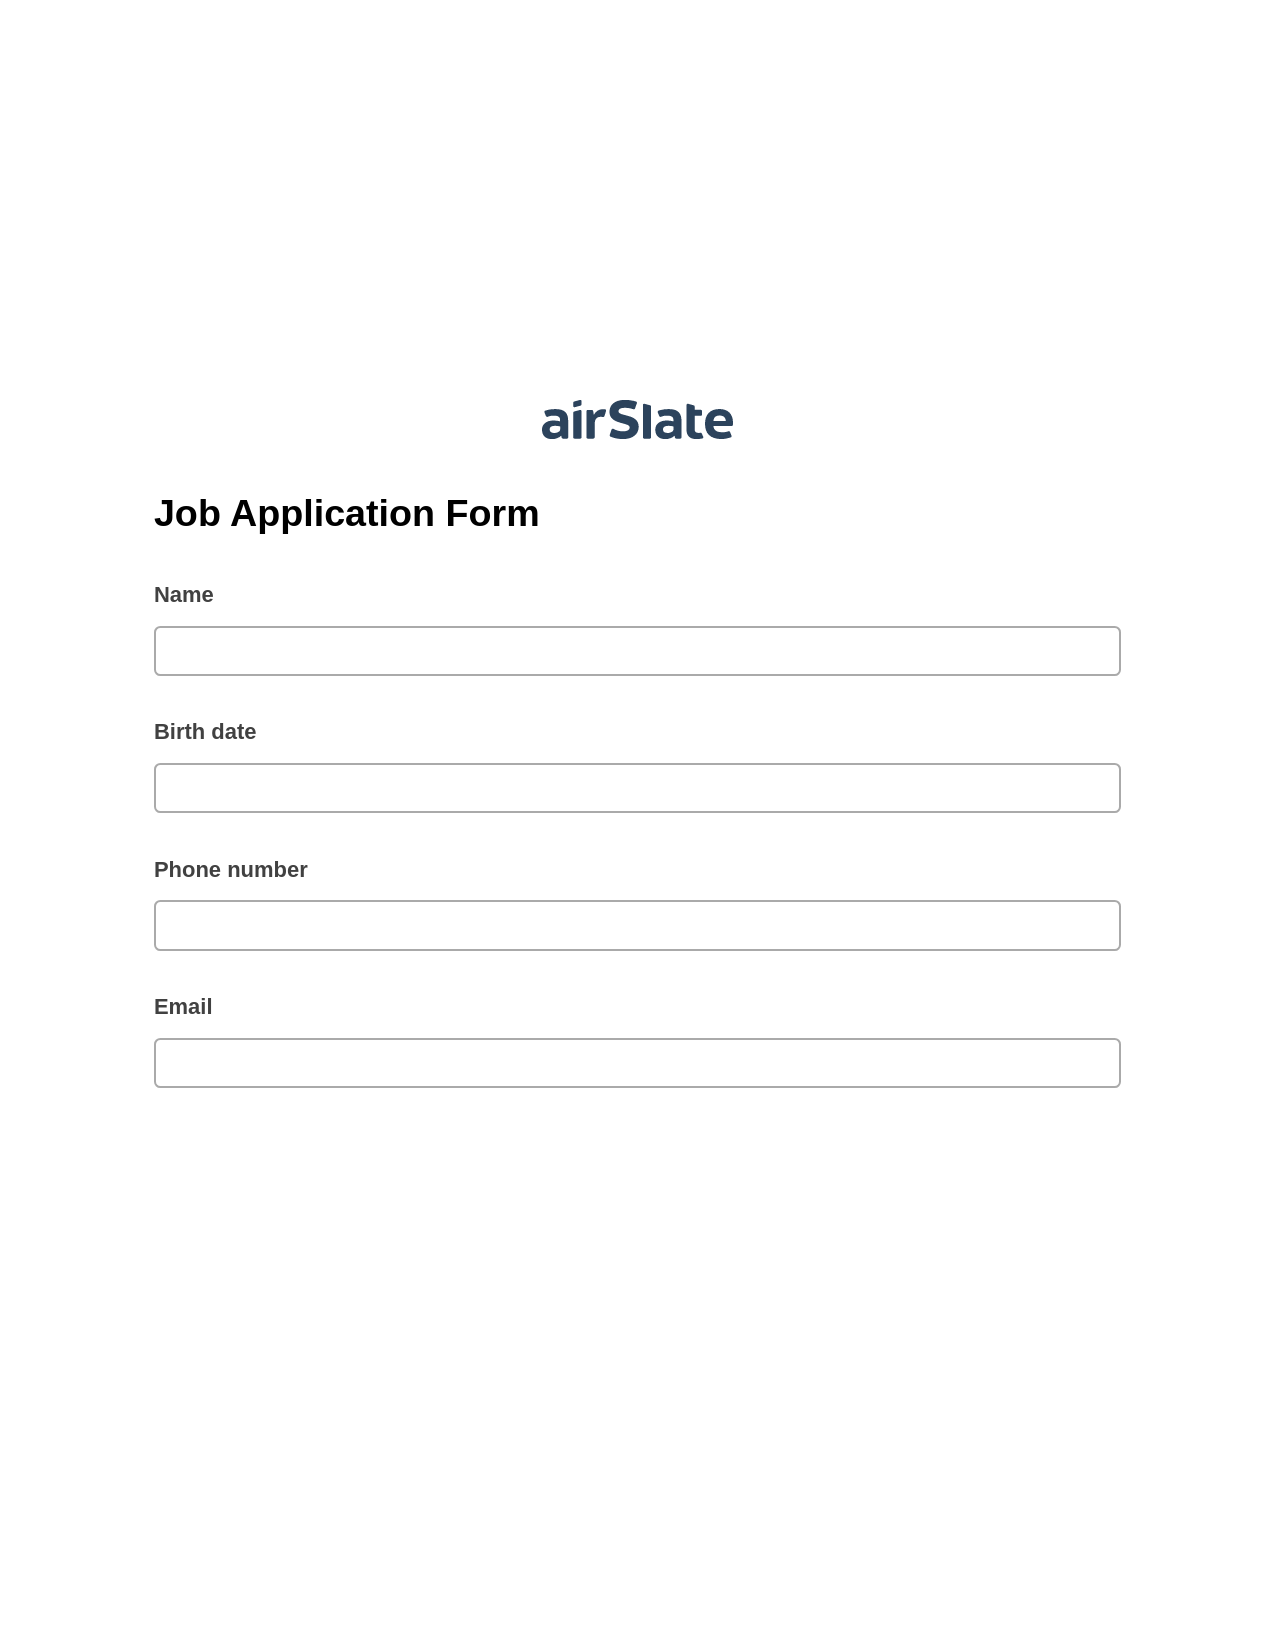 Job Application Form Pre-fill from CSV File Dropdown Options Bot, Create Slate Reminder Bot, Archive to SharePoint Folder Bot